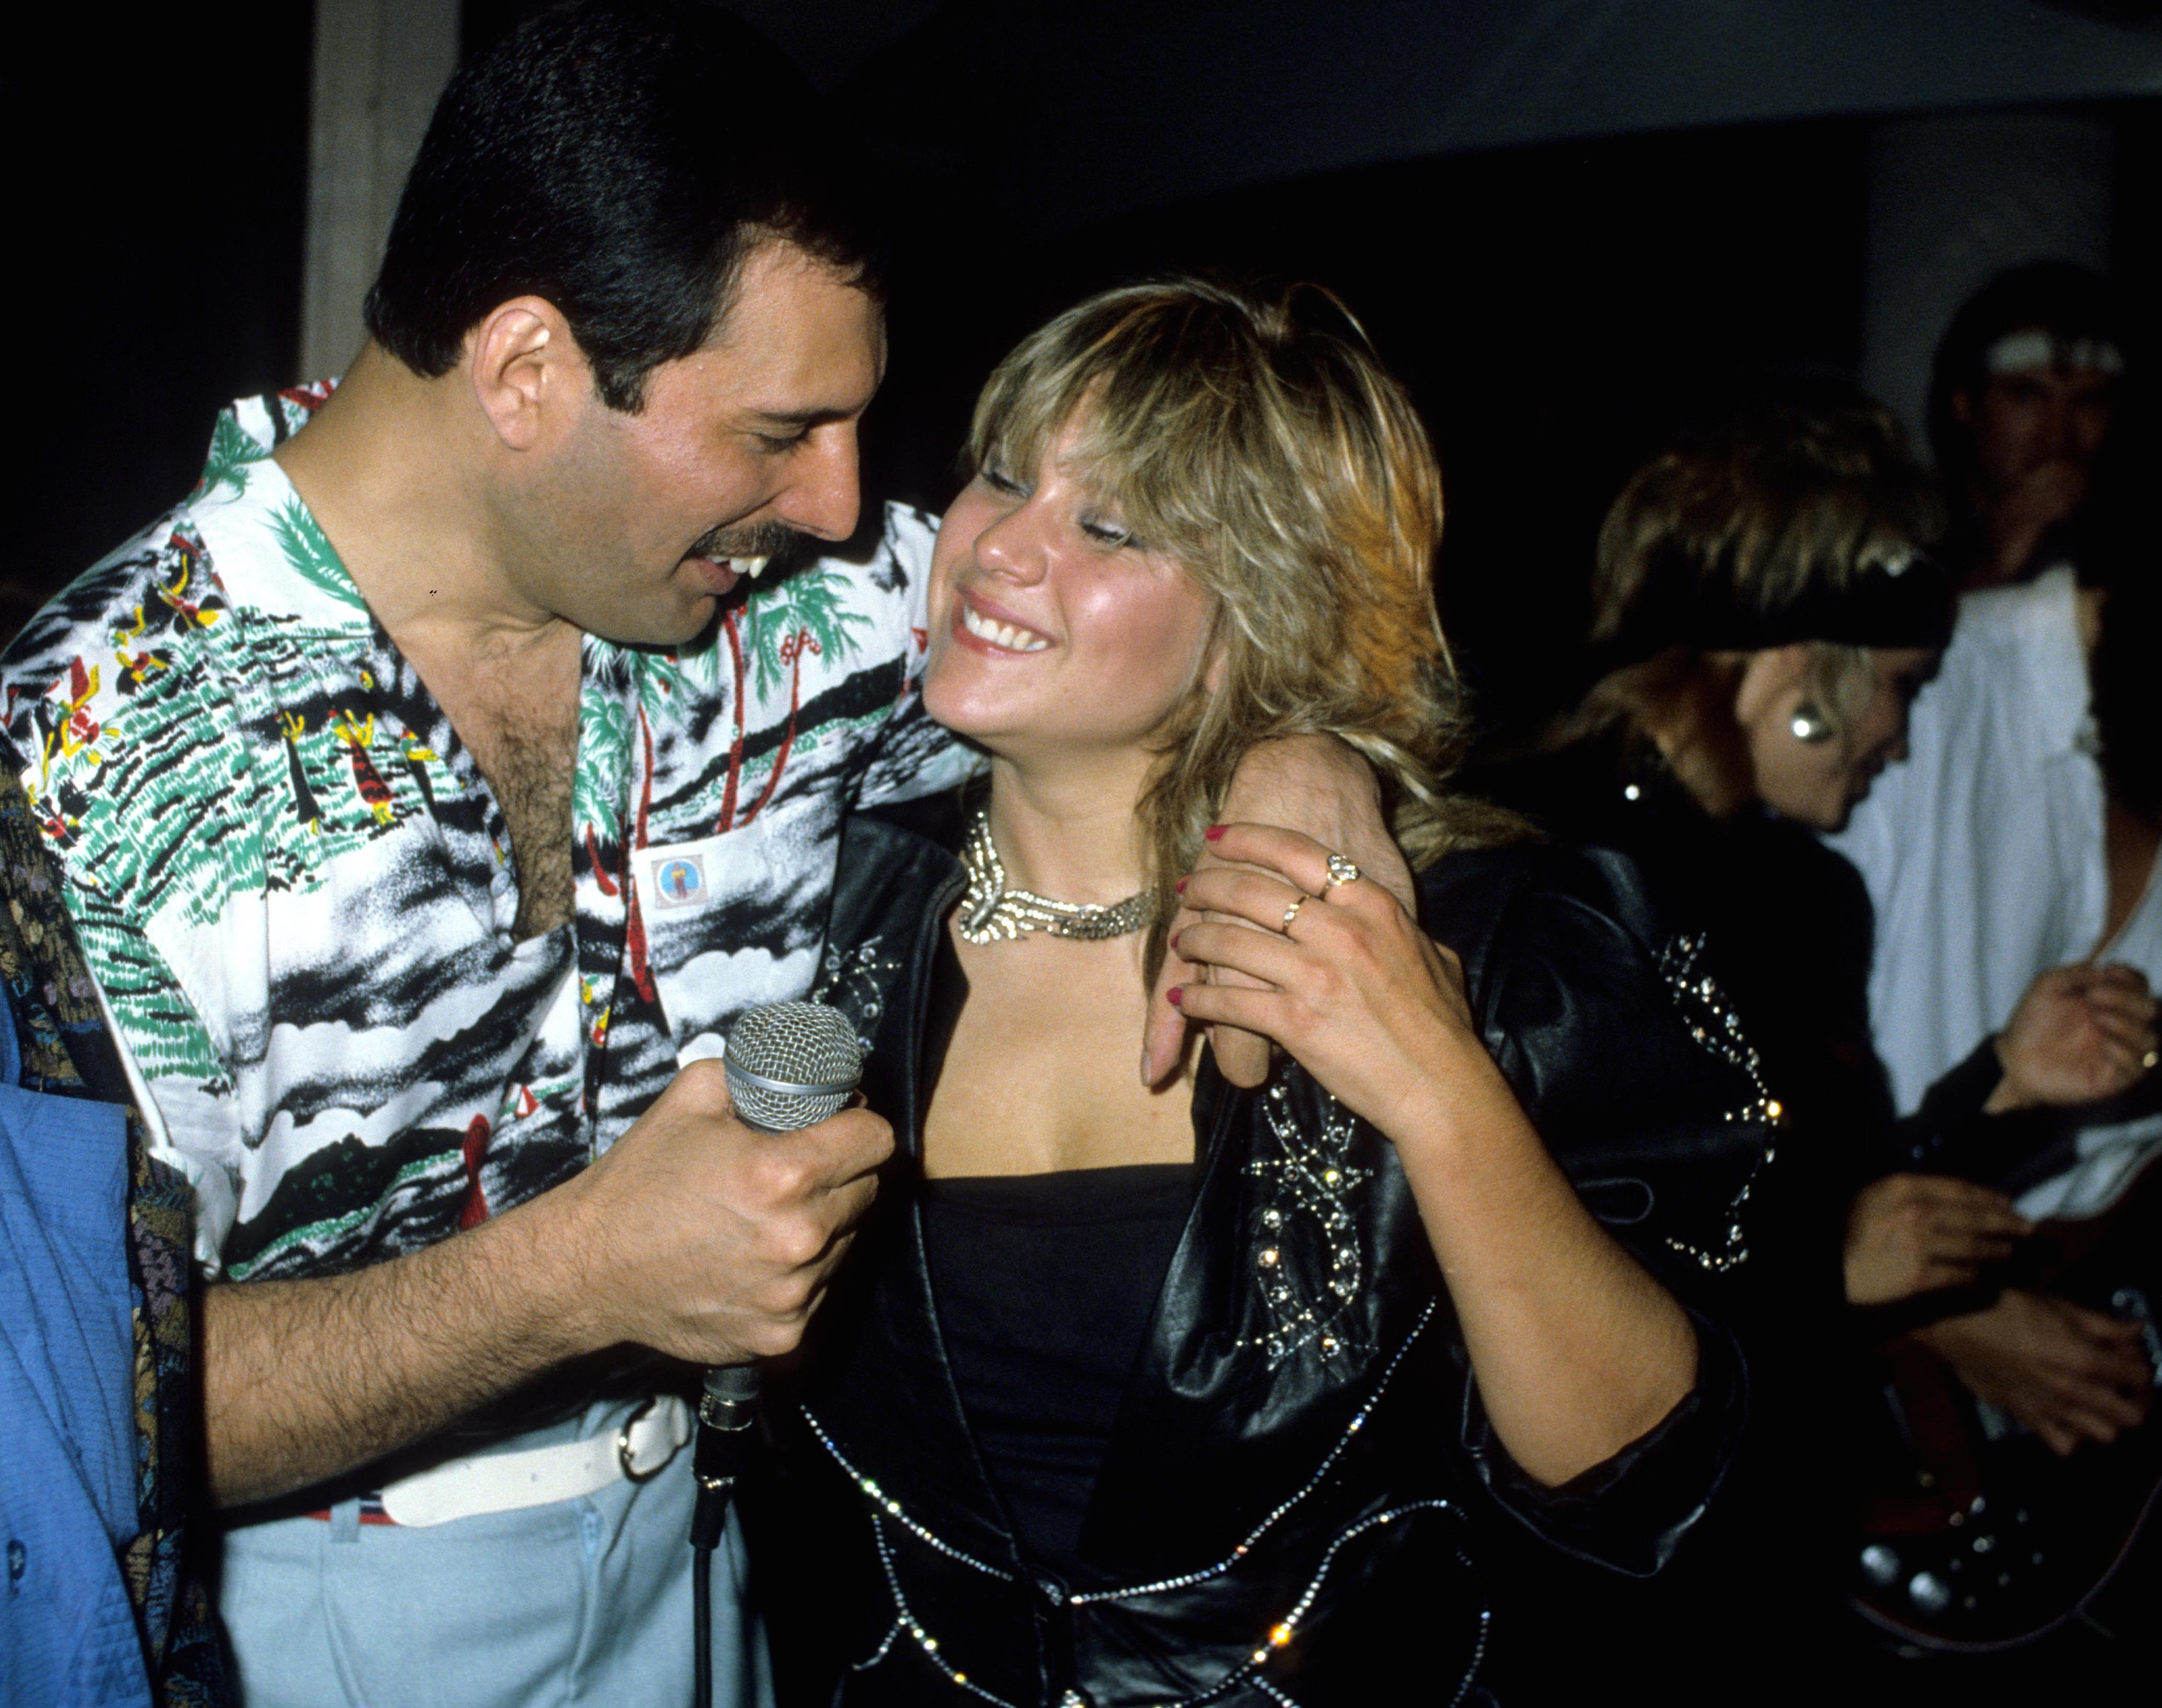 Mandatory Credit: Photo by Alan Davidson/Silverhub/REX/Shutterstock (7544916d) Queen Hold A Private Concert and Party and Were Billed As 'Dicky Heart and the Pacemakers' at the Kensington Roof Gardens Freddie Mercury and Samantha Fox Queen Private Party and Concert - 11 Jul 1986